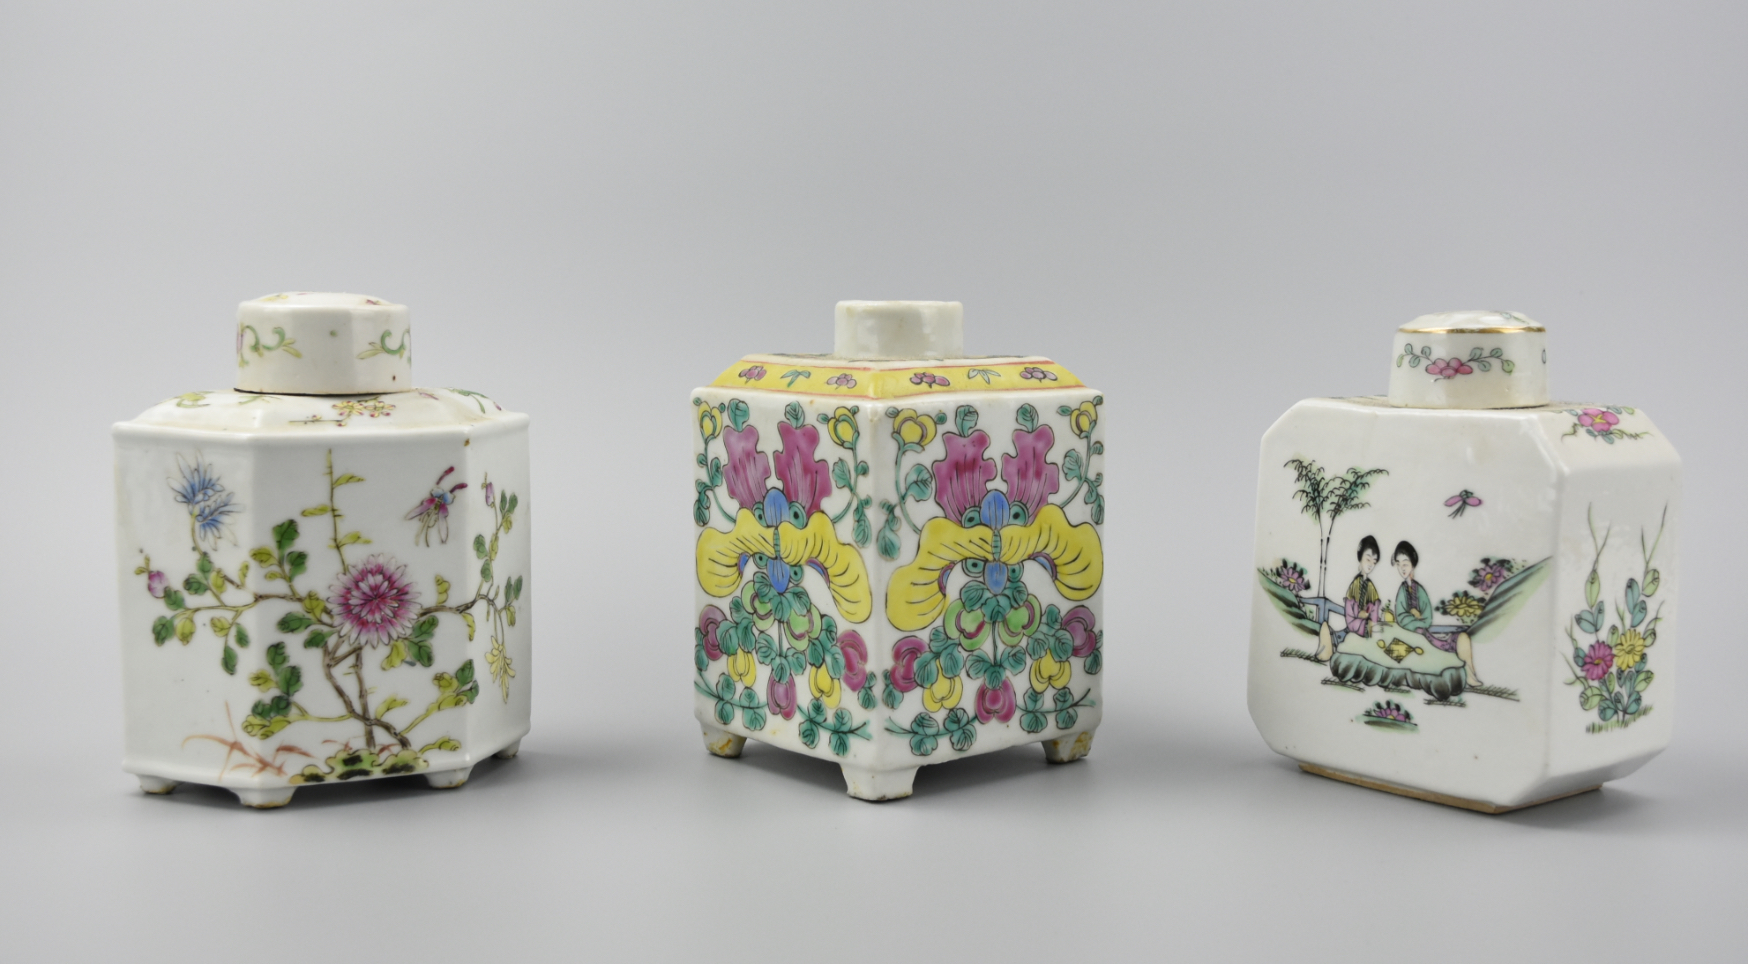  3 CHINESE FAMILLE ROSE TEA CADDY  2cf800